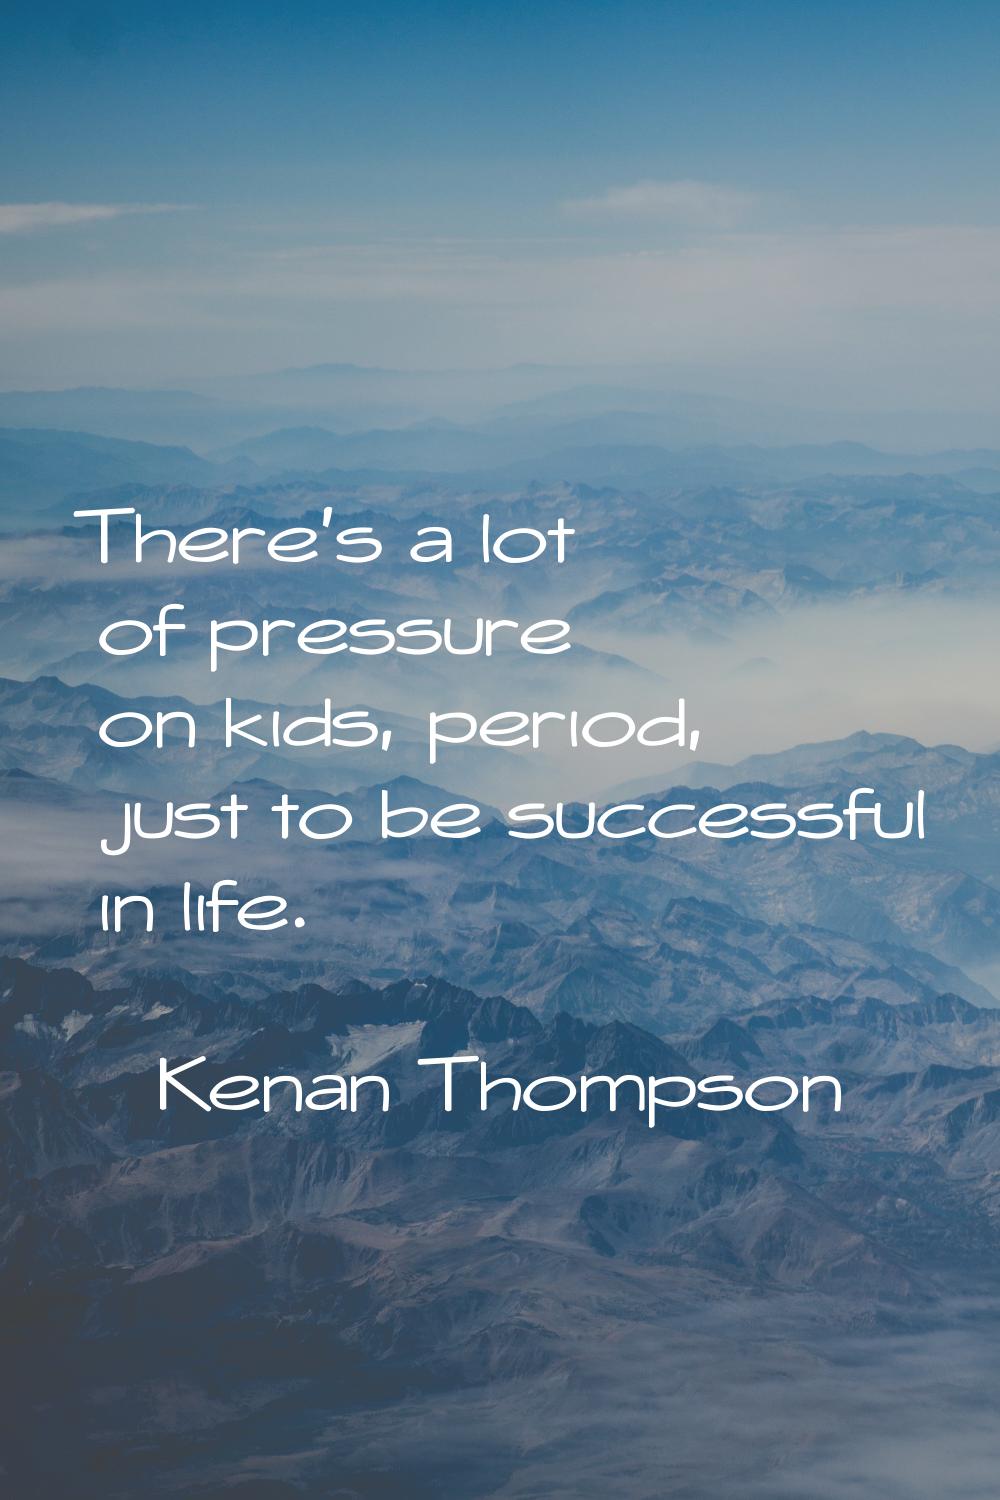 There's a lot of pressure on kids, period, just to be successful in life.